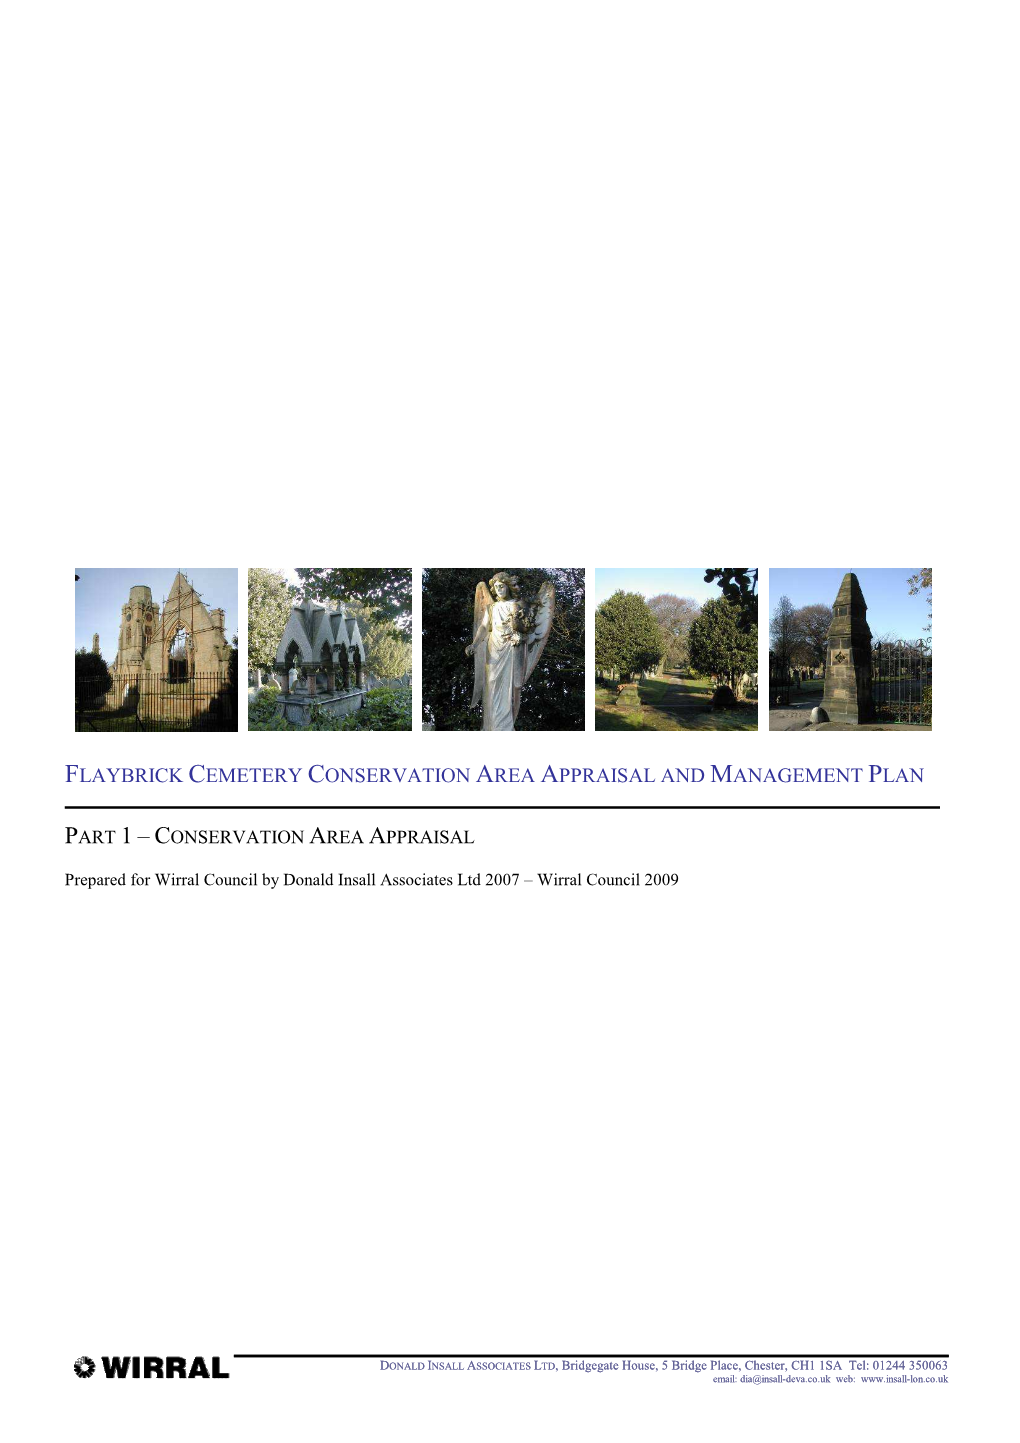 Flaybrick Cemetery Conservation Area Appraisal and Management Plan